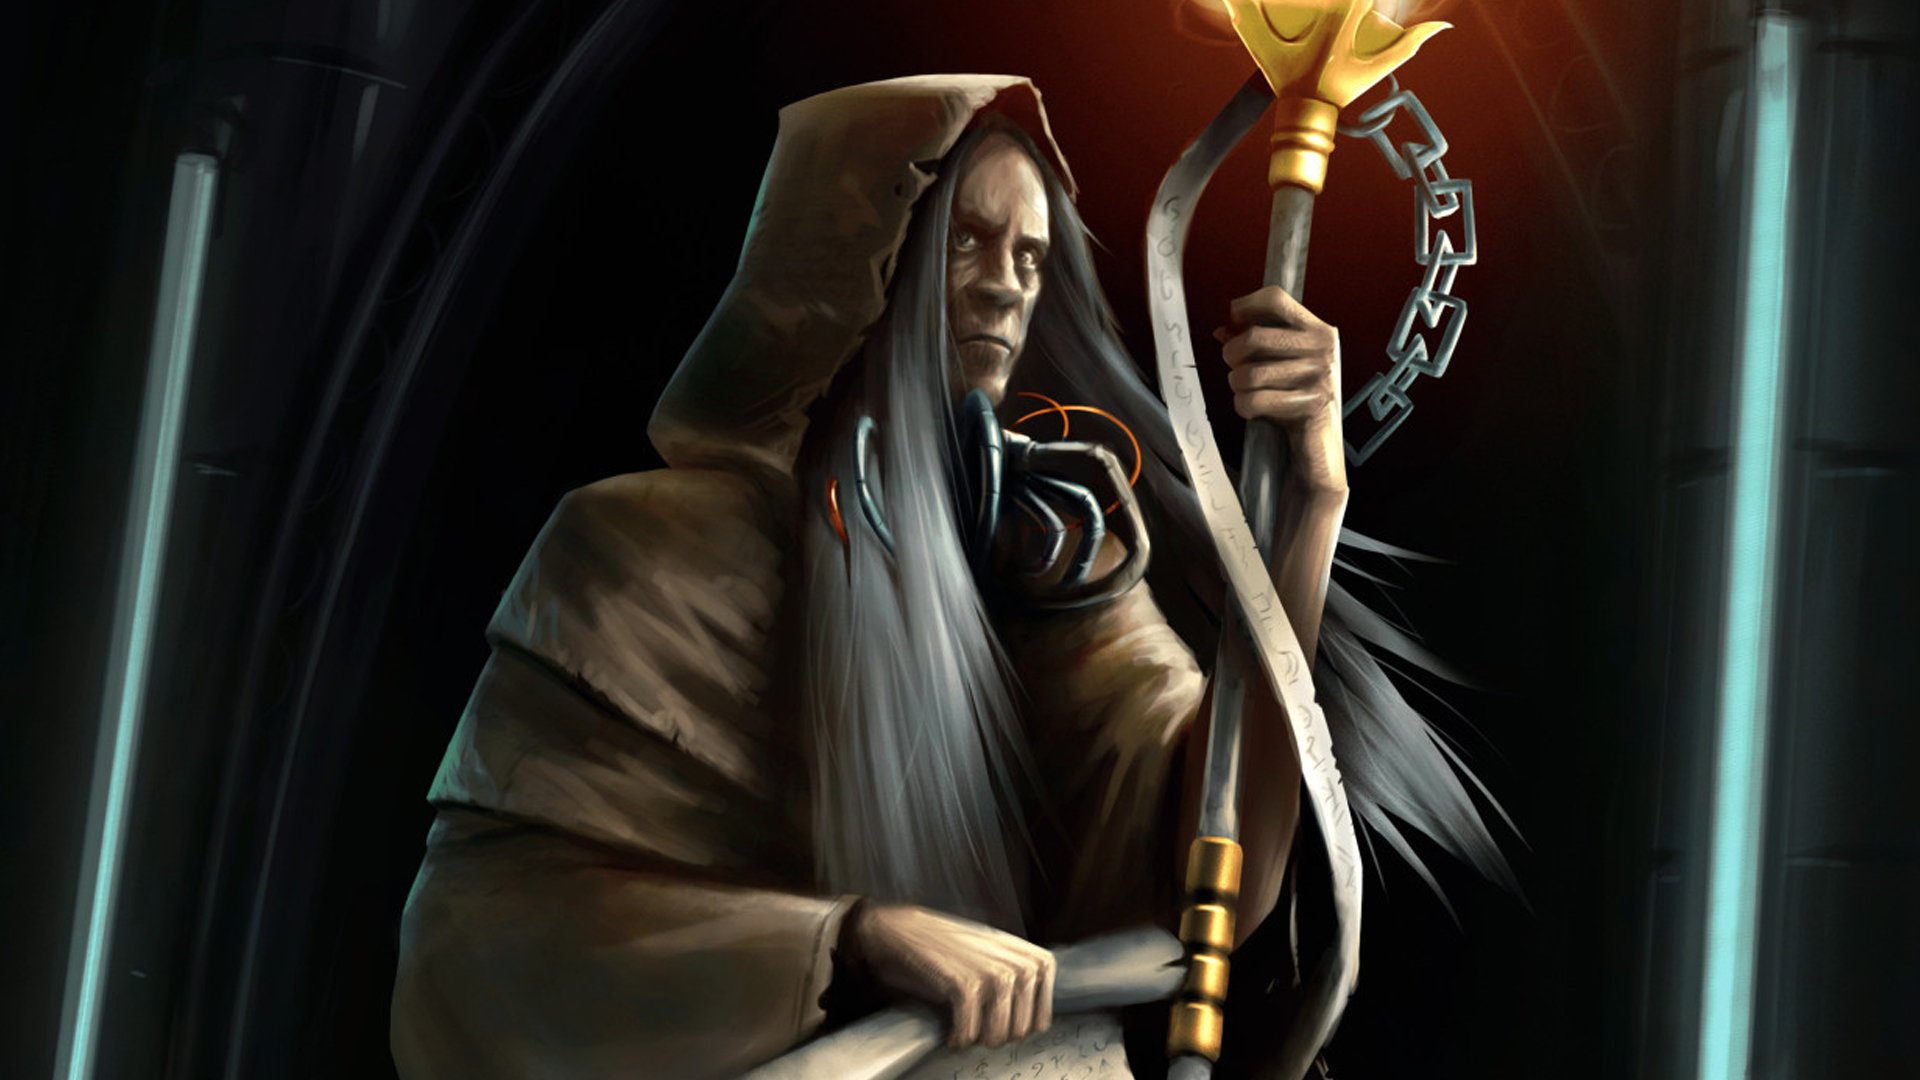 Warhammer 40k Malcador the Sigillite guide - Games Workshop artwork showing Malcador in a robe, holding his staff, in a darkened room